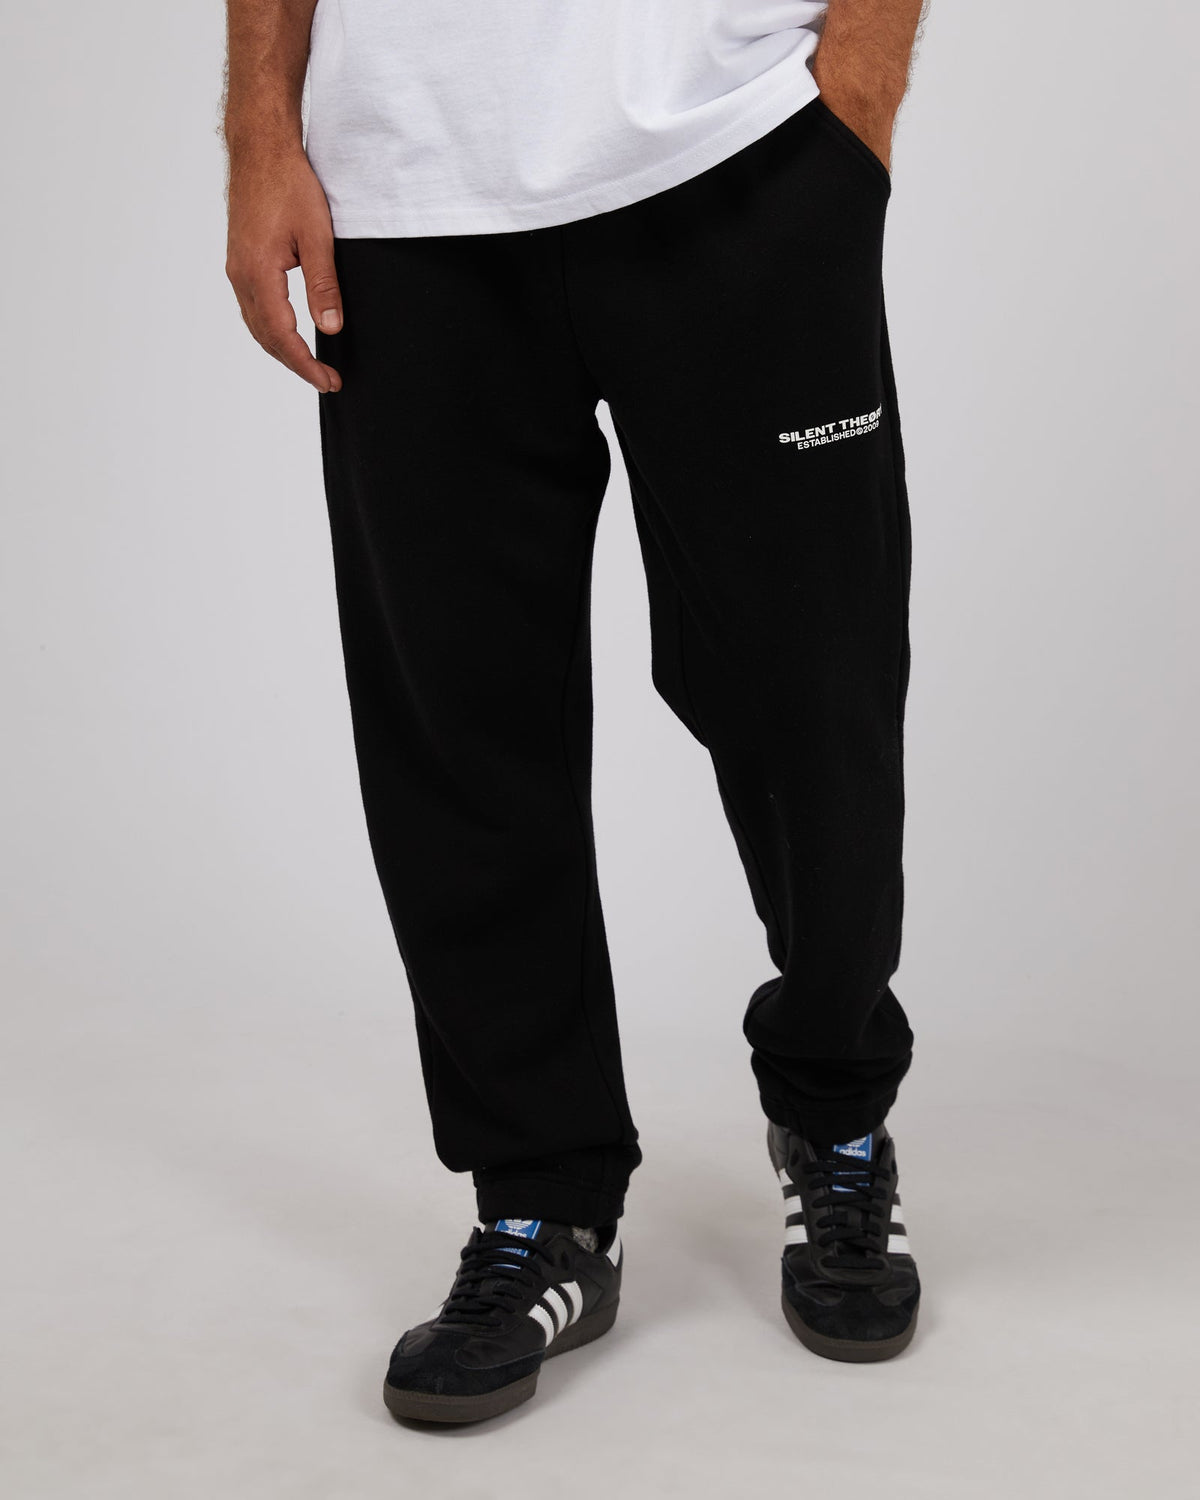 Silent Theory-Essential Theory Track Pant Black-Edge Clothing